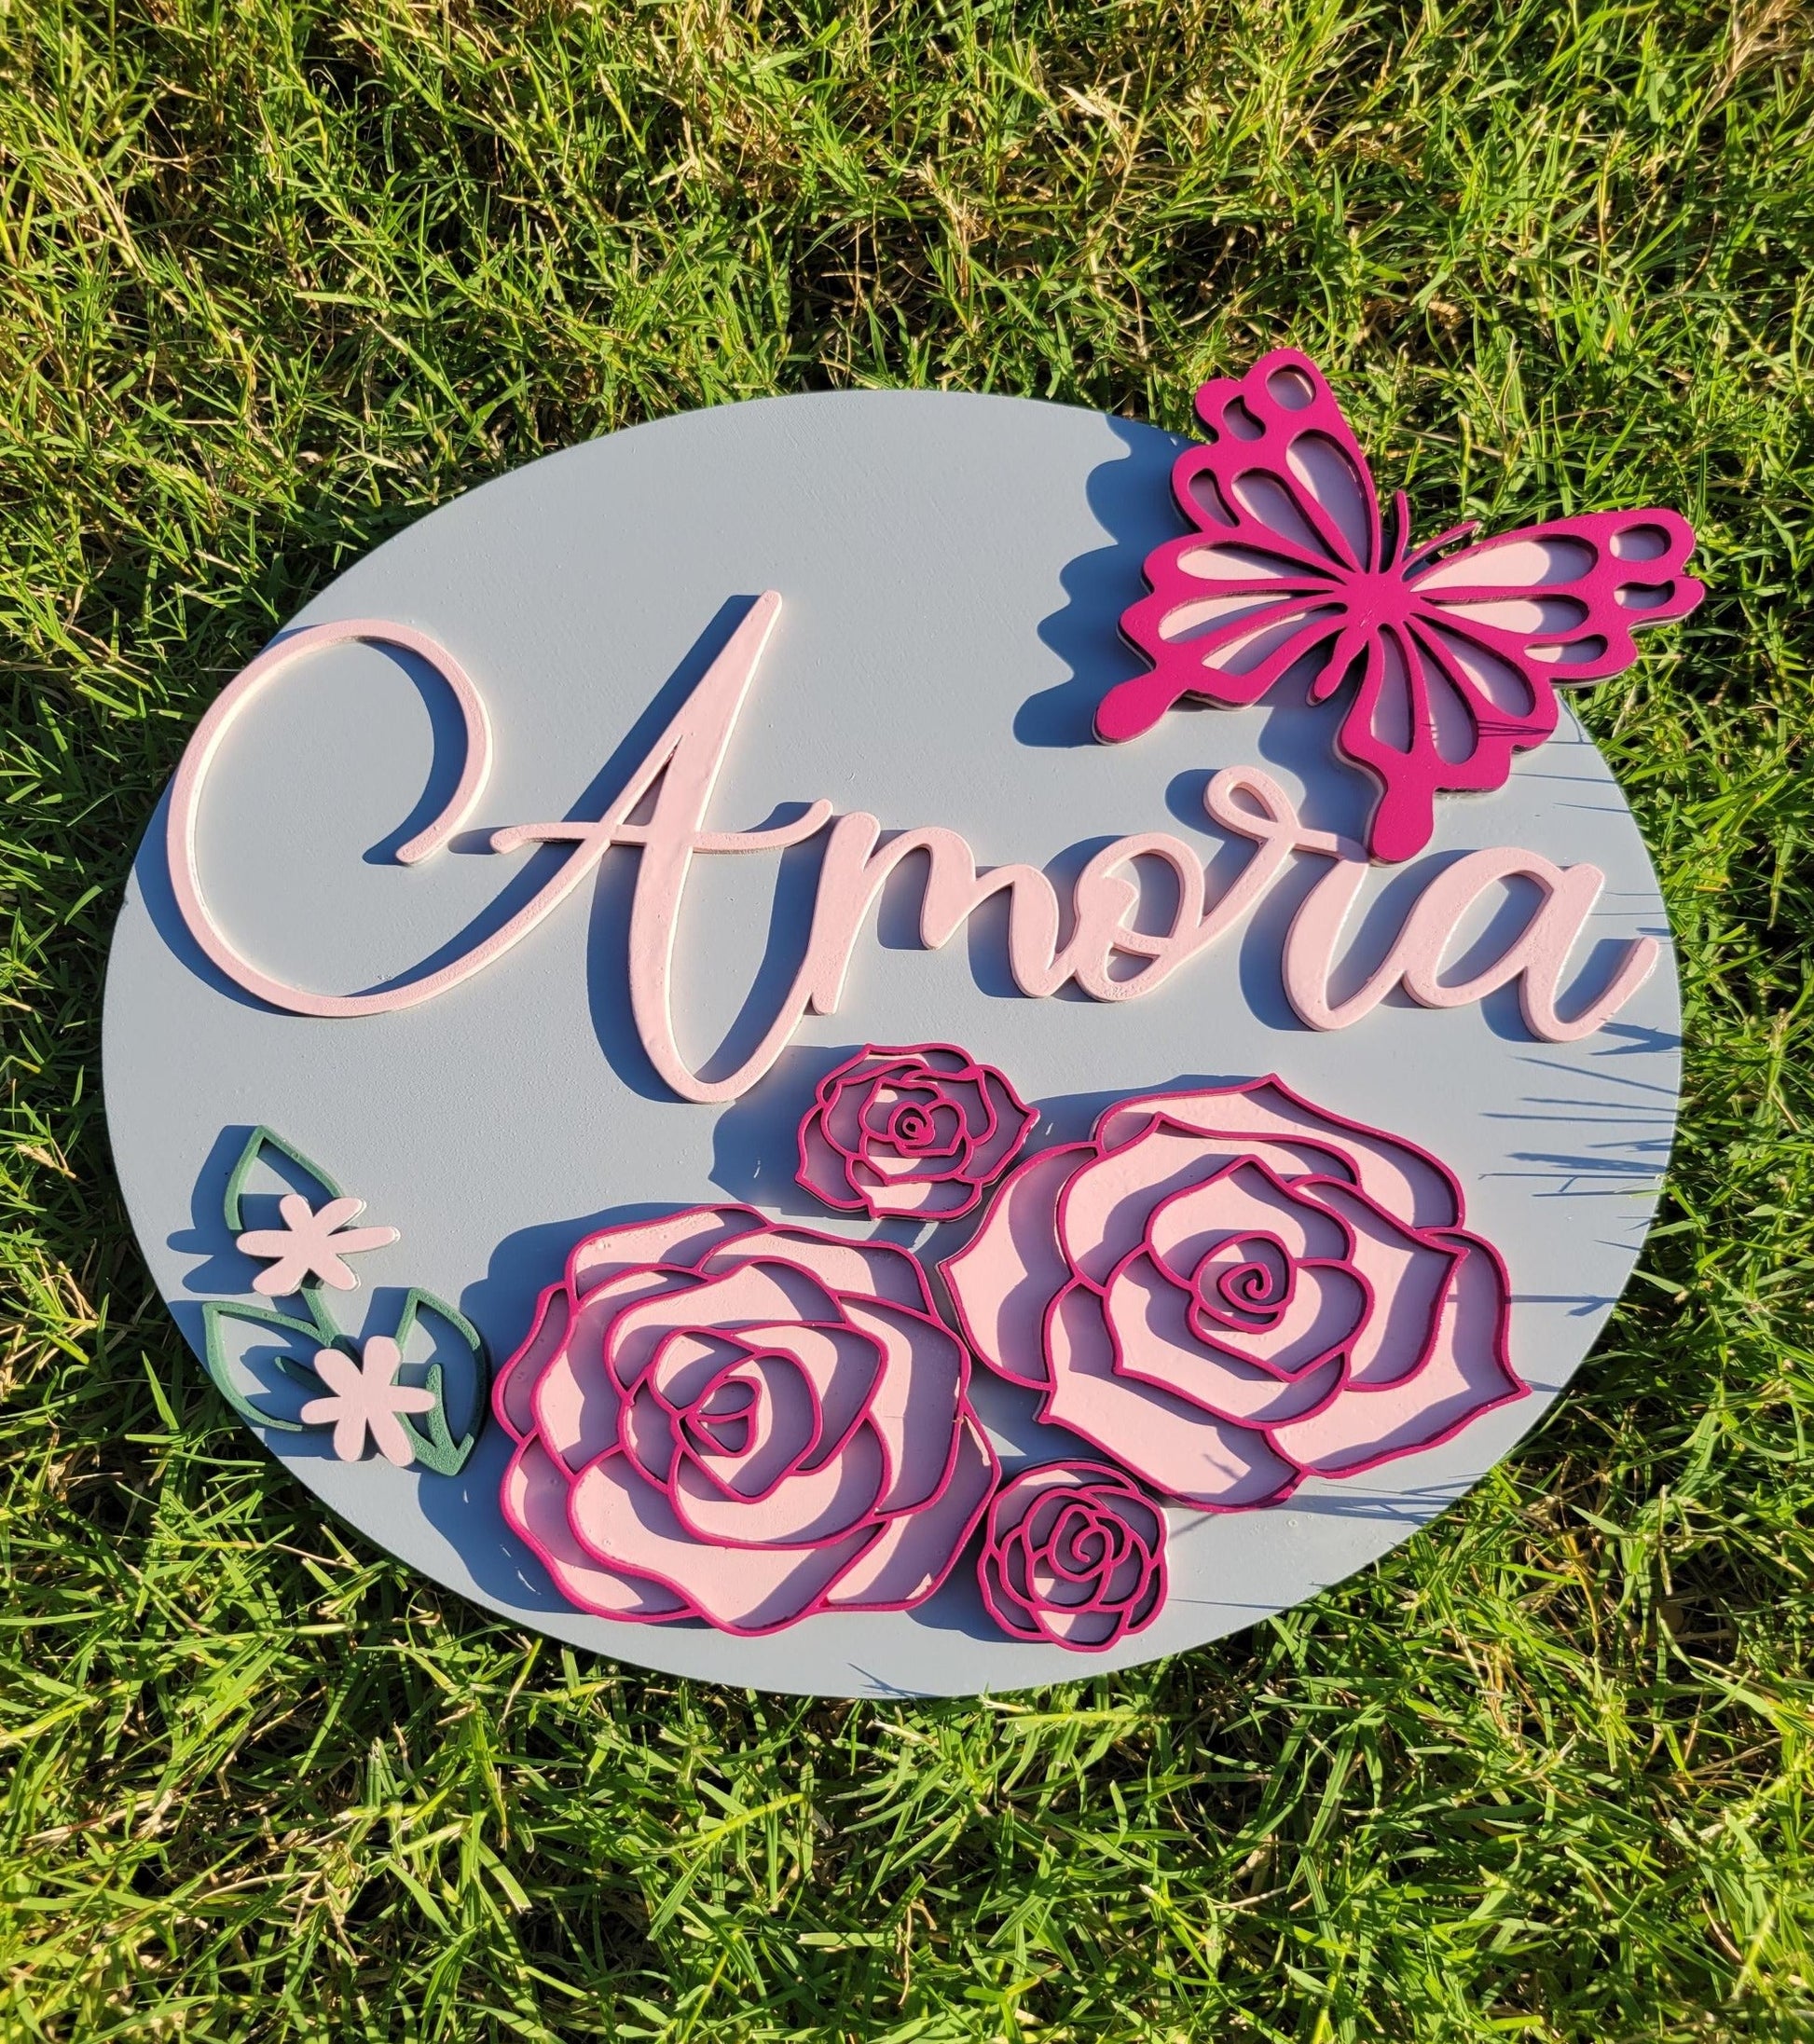 Two floral nursery signs. One gray background with two toned pink flowers and butterfly